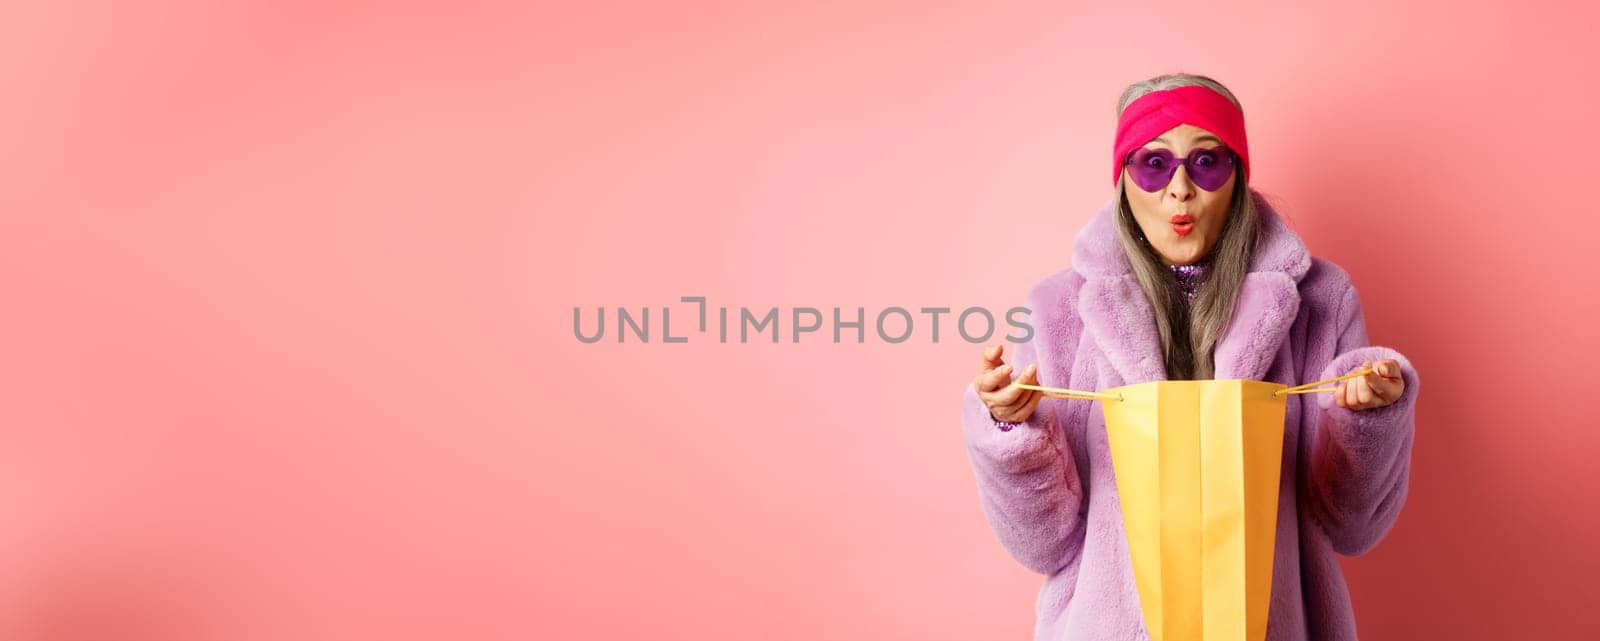 Shopping and fashion concept. Stylish asian elderly woman in sunglasses and faux fur coat open paper bag with gifts, looking surprised at camera, pink background.